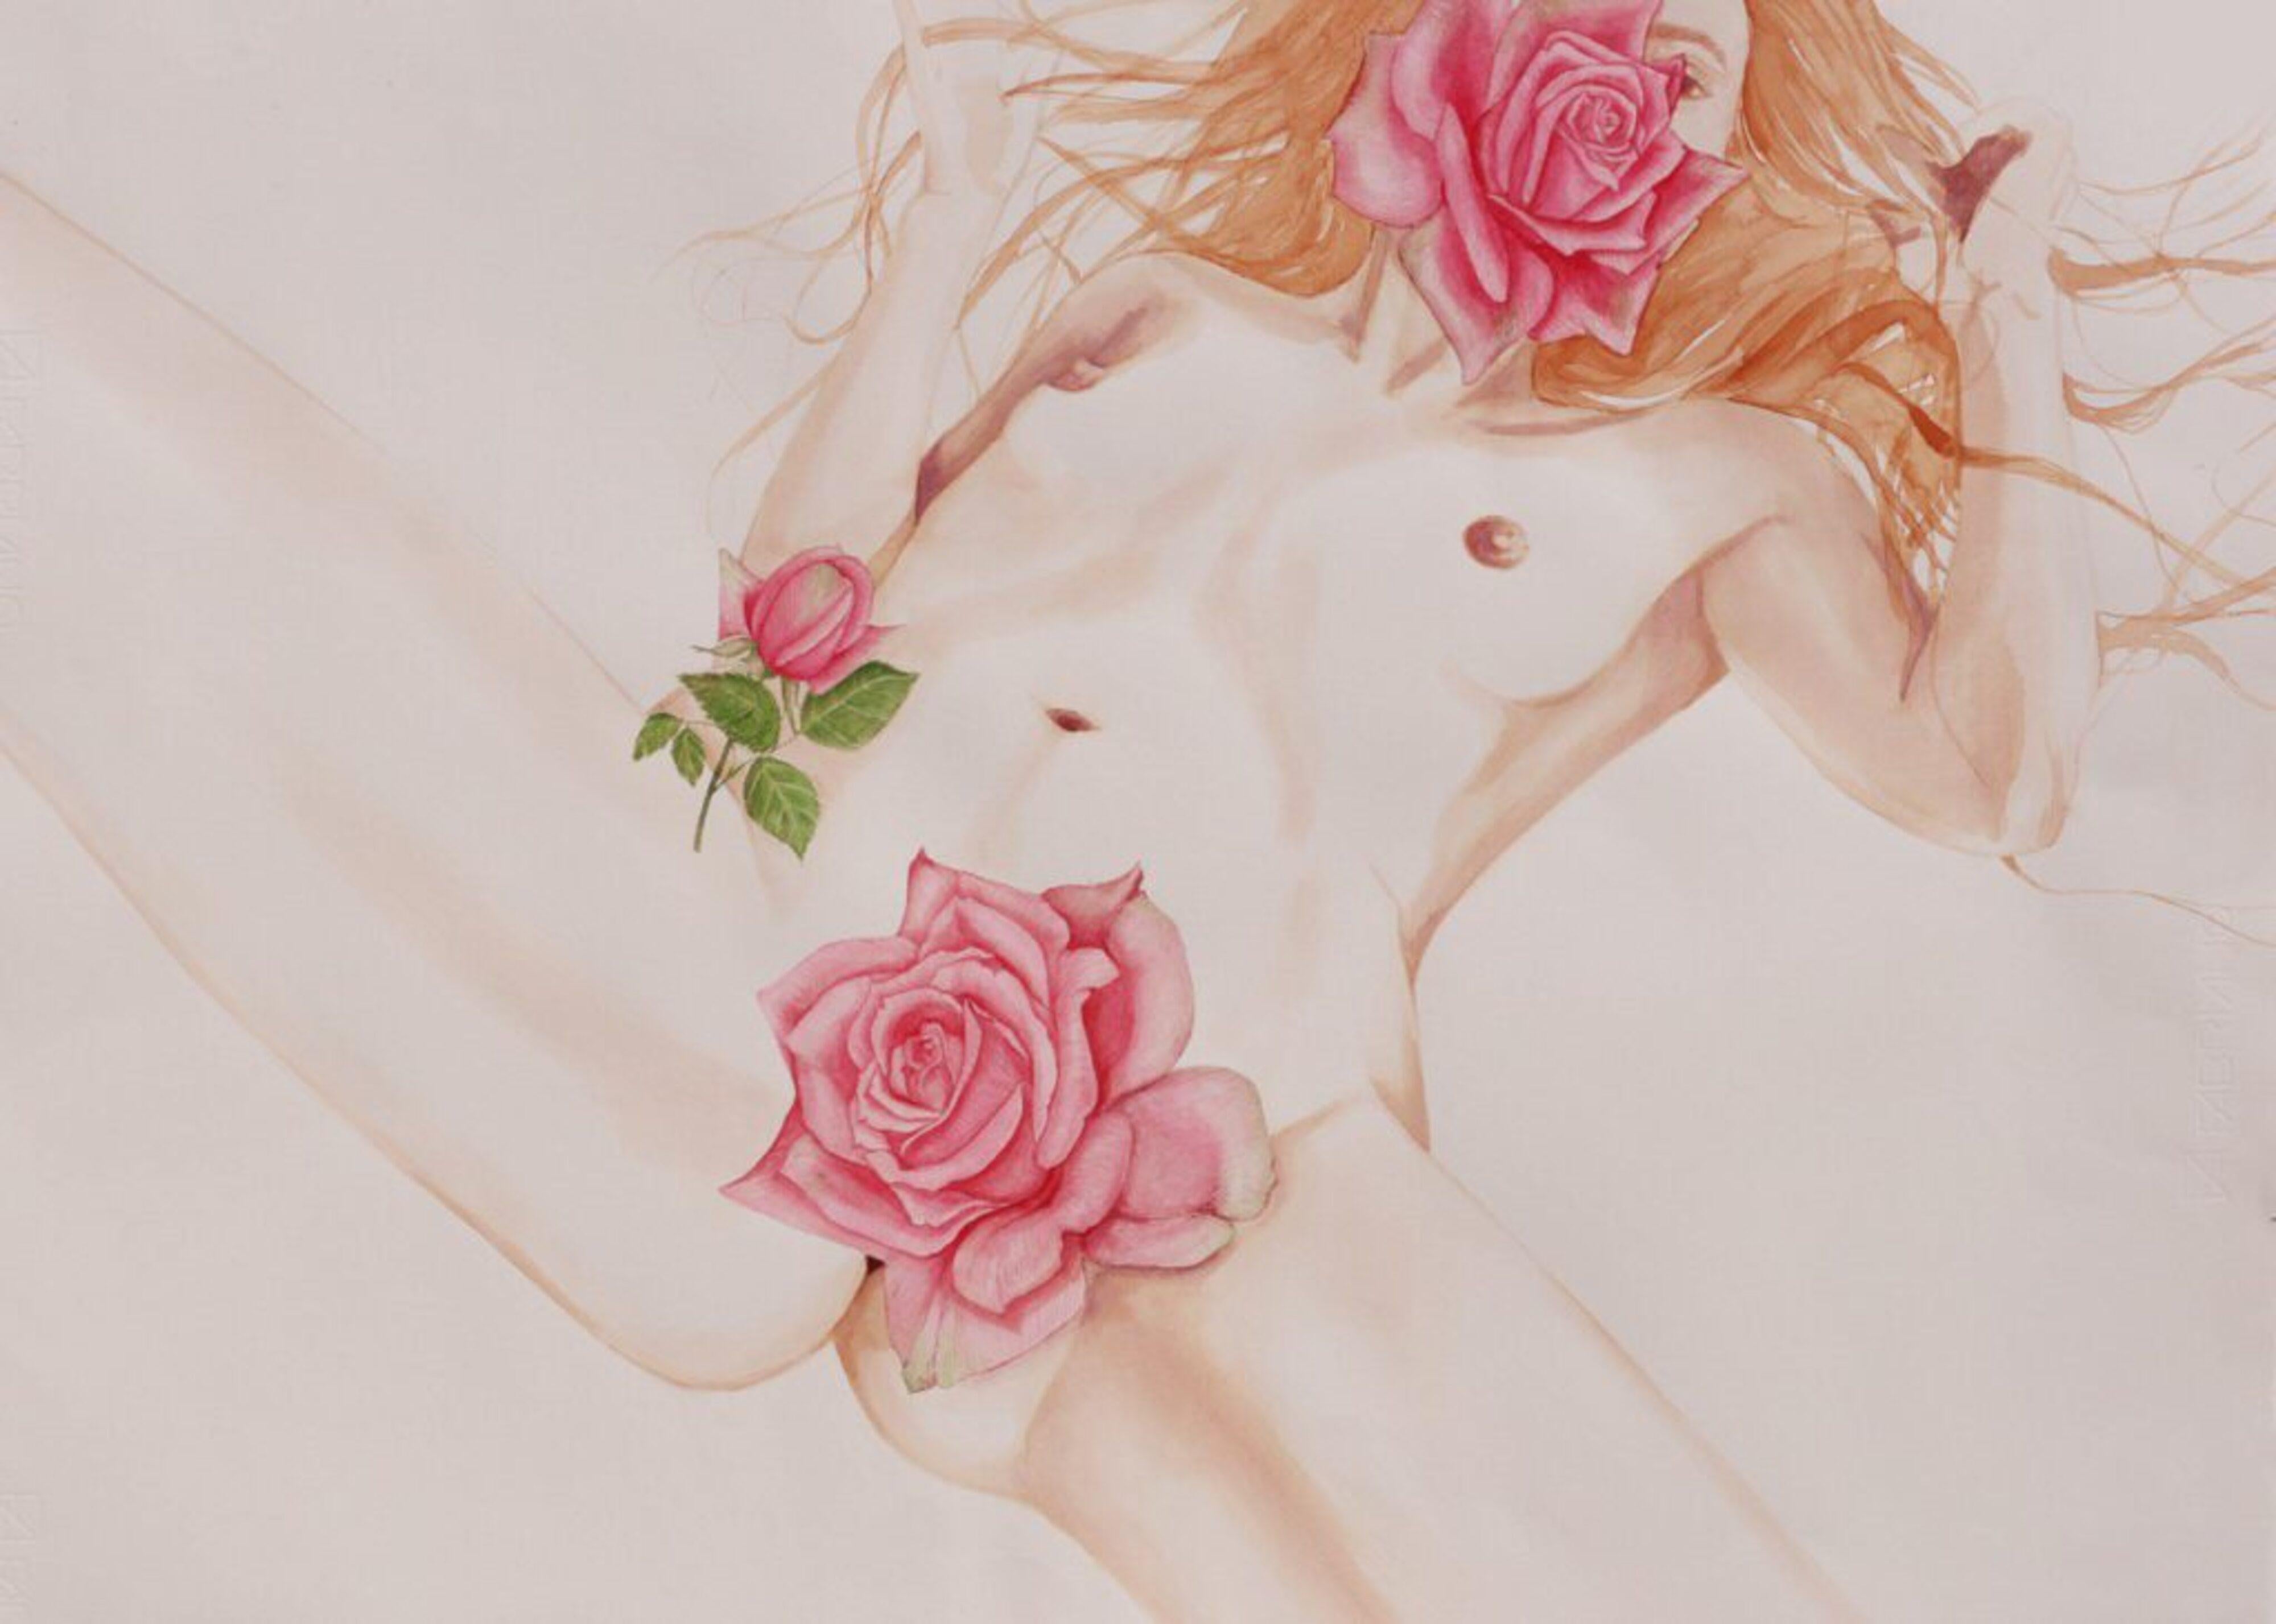 positive sexual objectification, watercolor, paper, 76x56cm - Art by Elena Brauschenberg